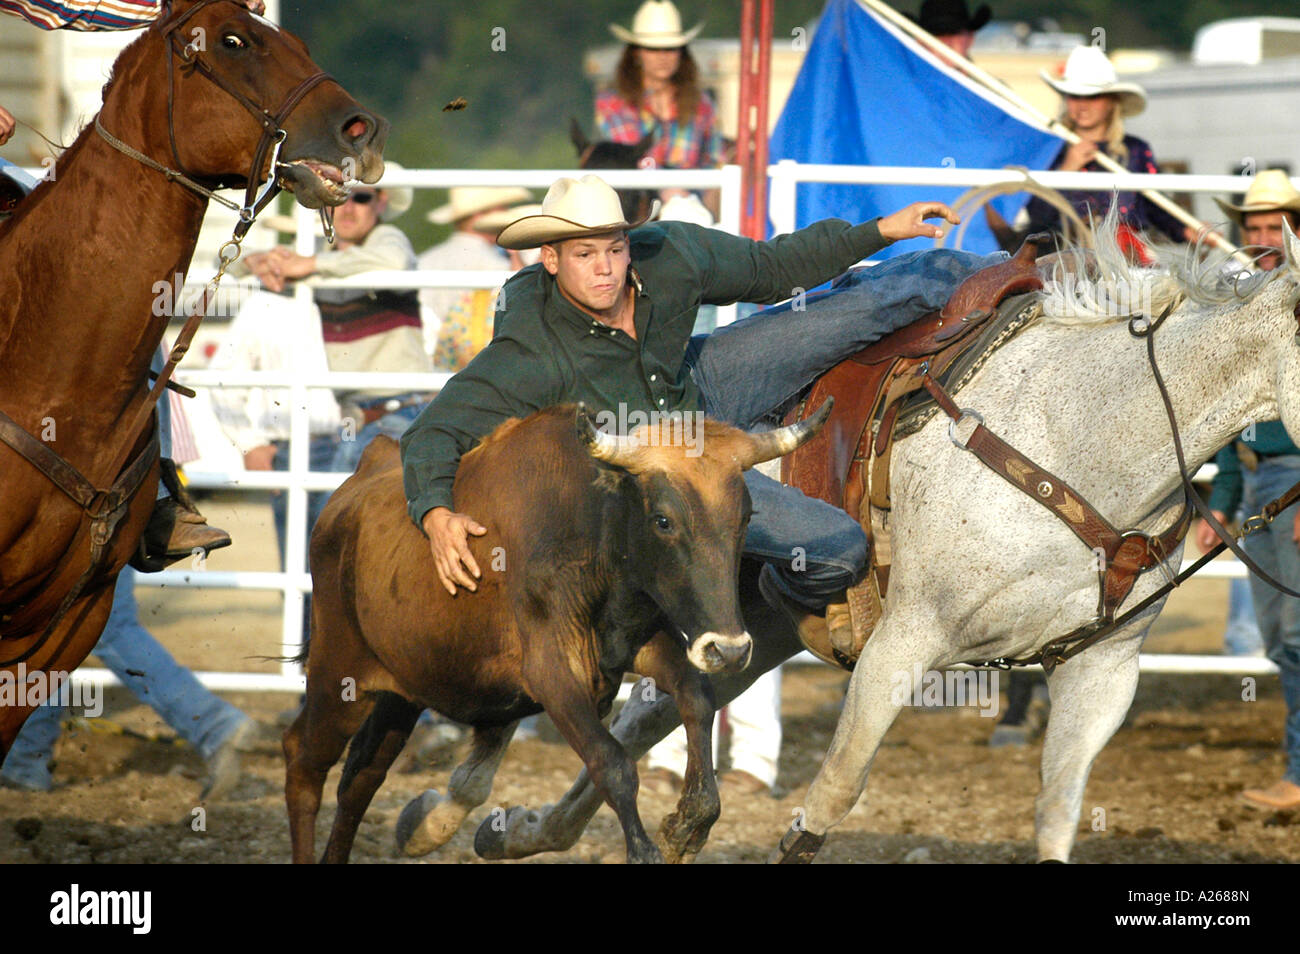 Cowboys compete in Rodeo action Stock Photo